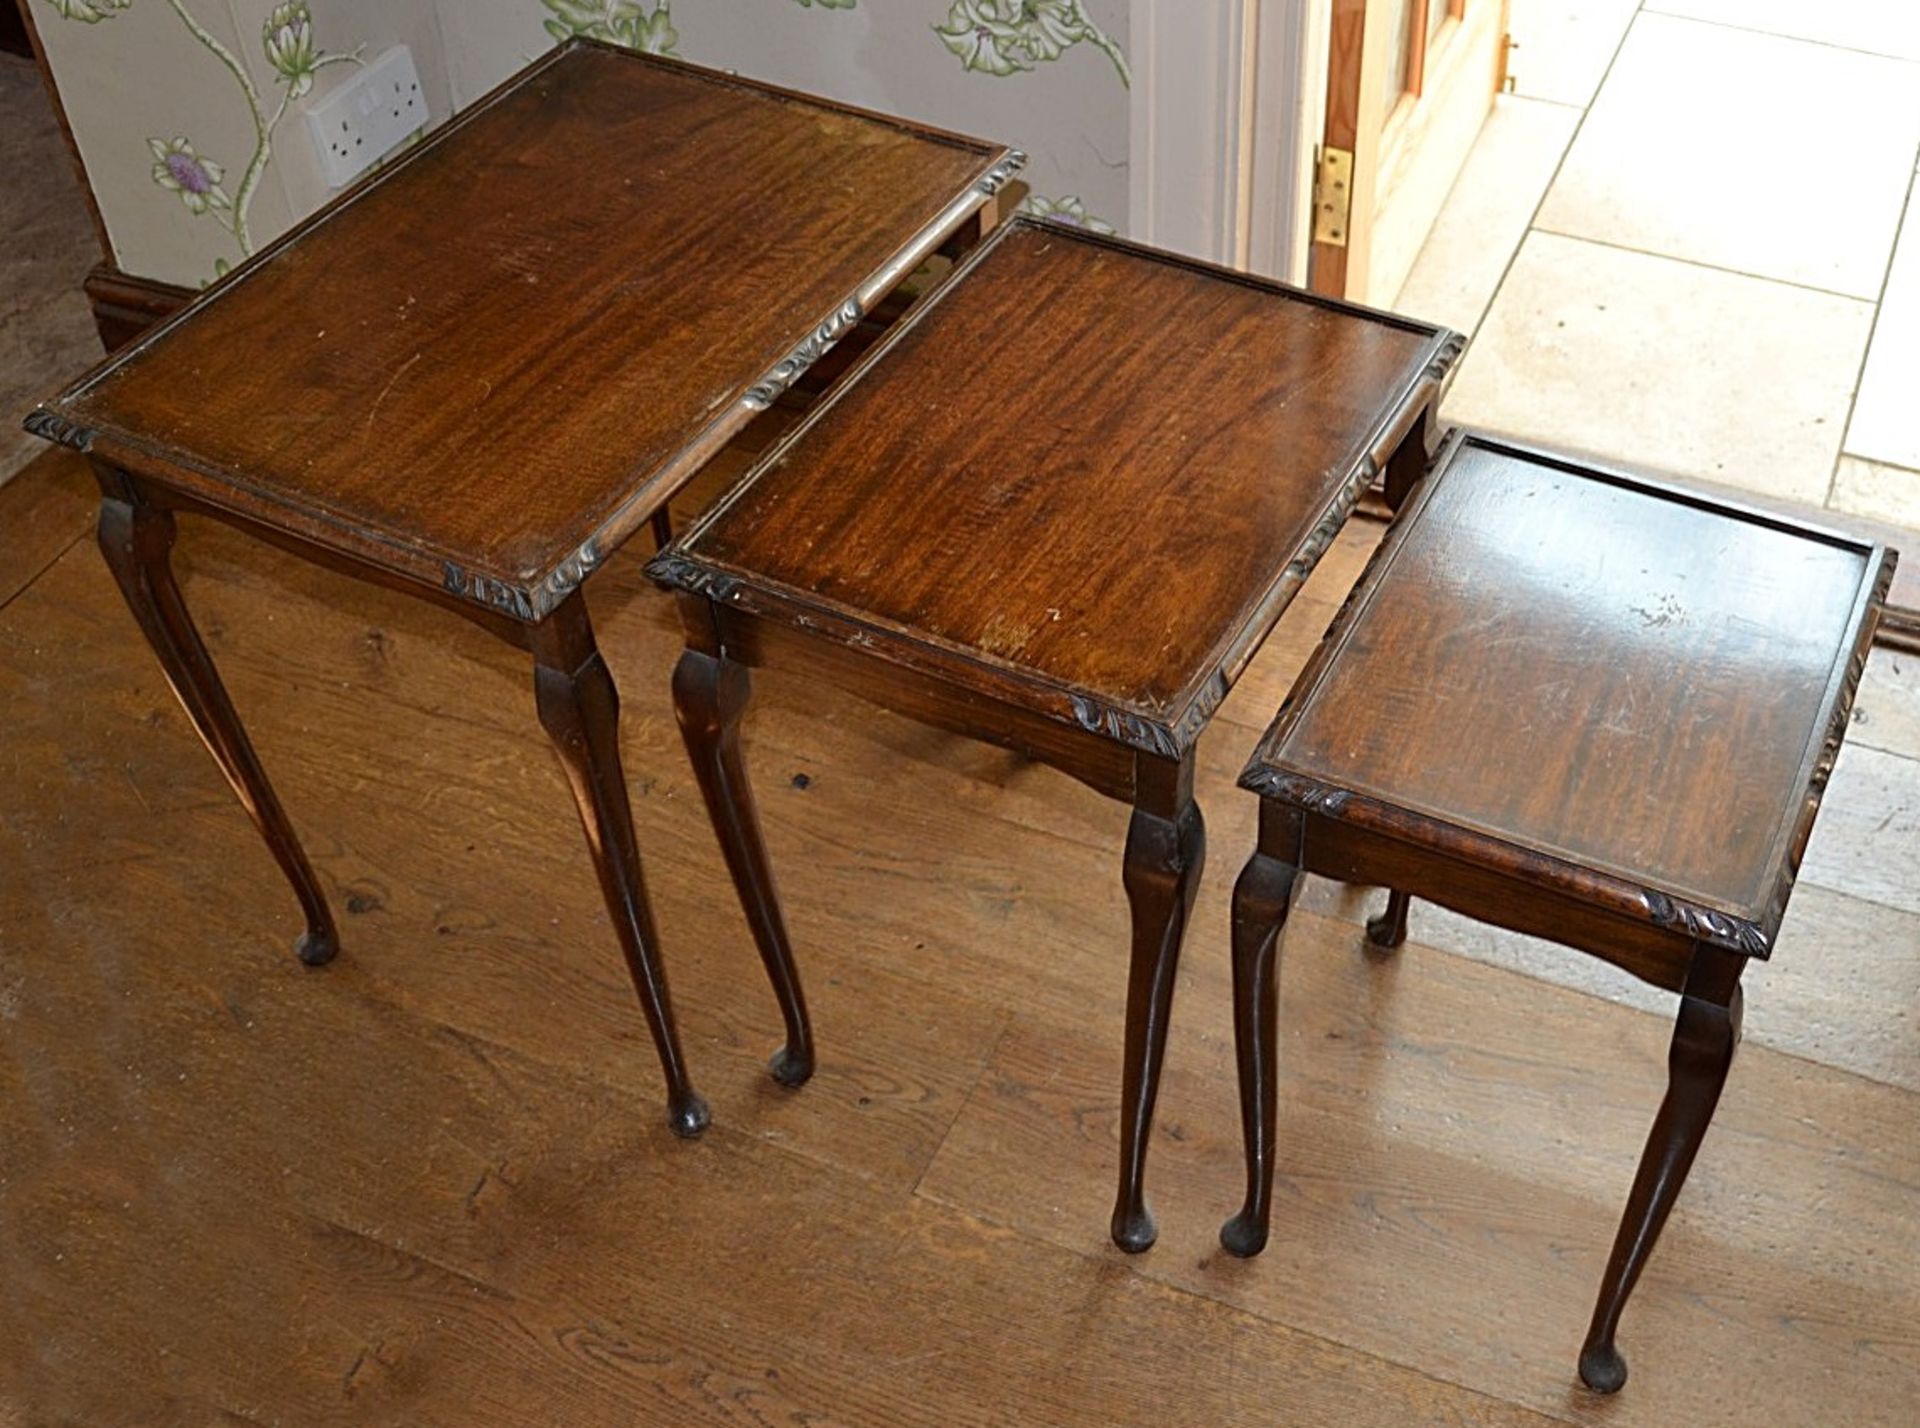 1 x Vintage Nest Of Tables - From A Country Hotel & Restaurant Environment - Dimensions: W56 x D41 x